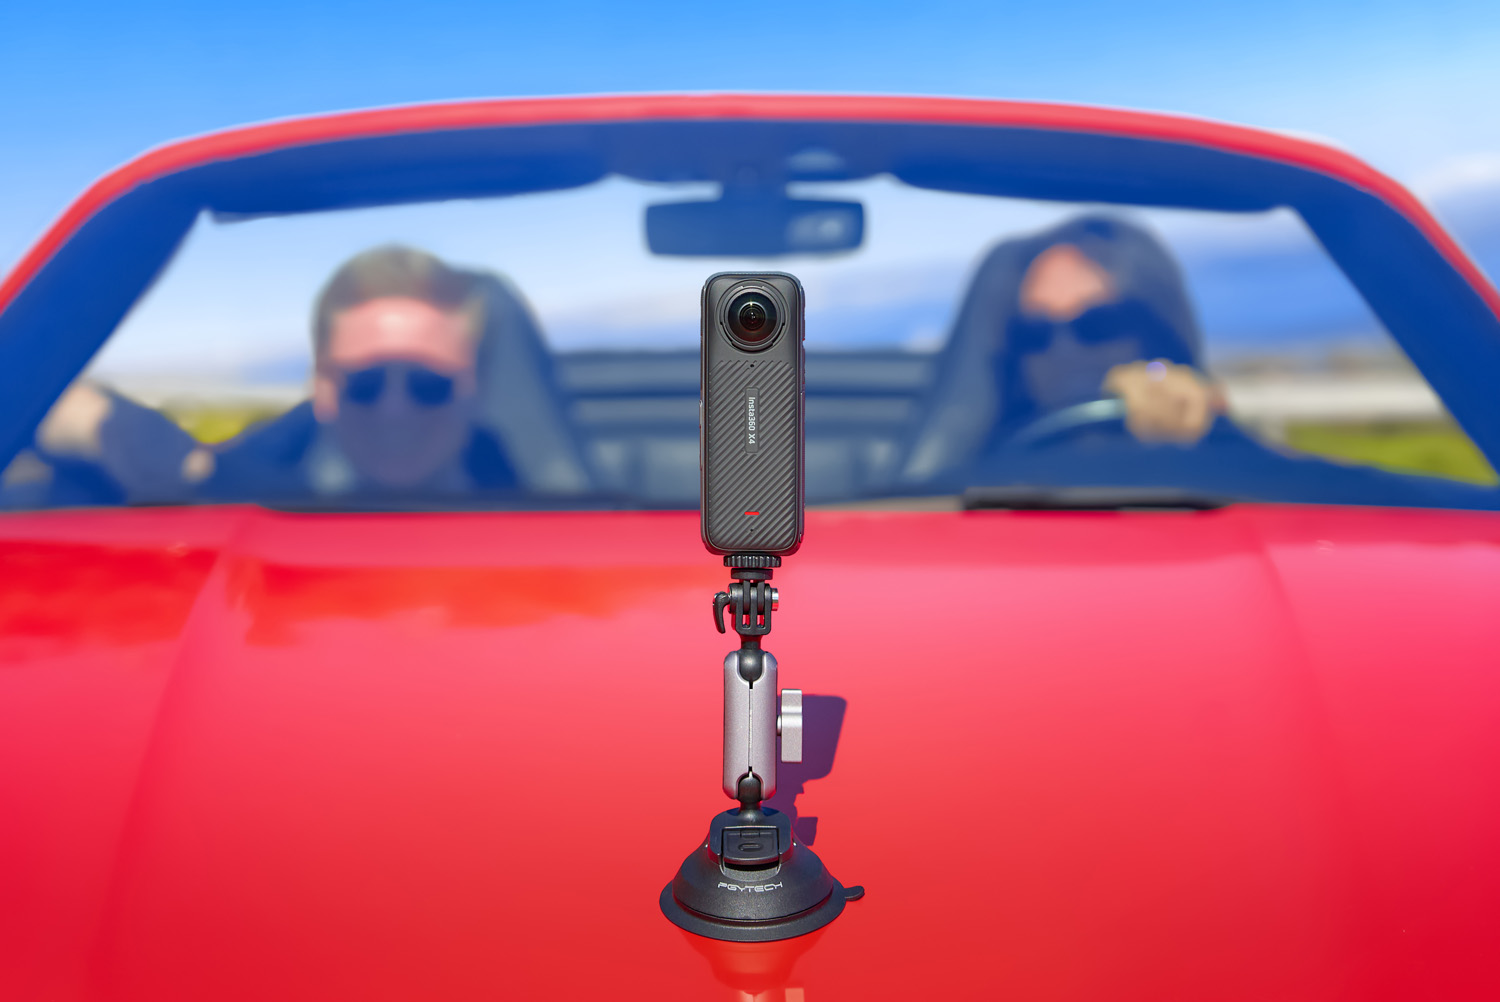 A 360-degree camera mounted on a red car's hood, with two blurred individuals in the background, one driving and the other in the passenger seat, both wearing sunglasses.